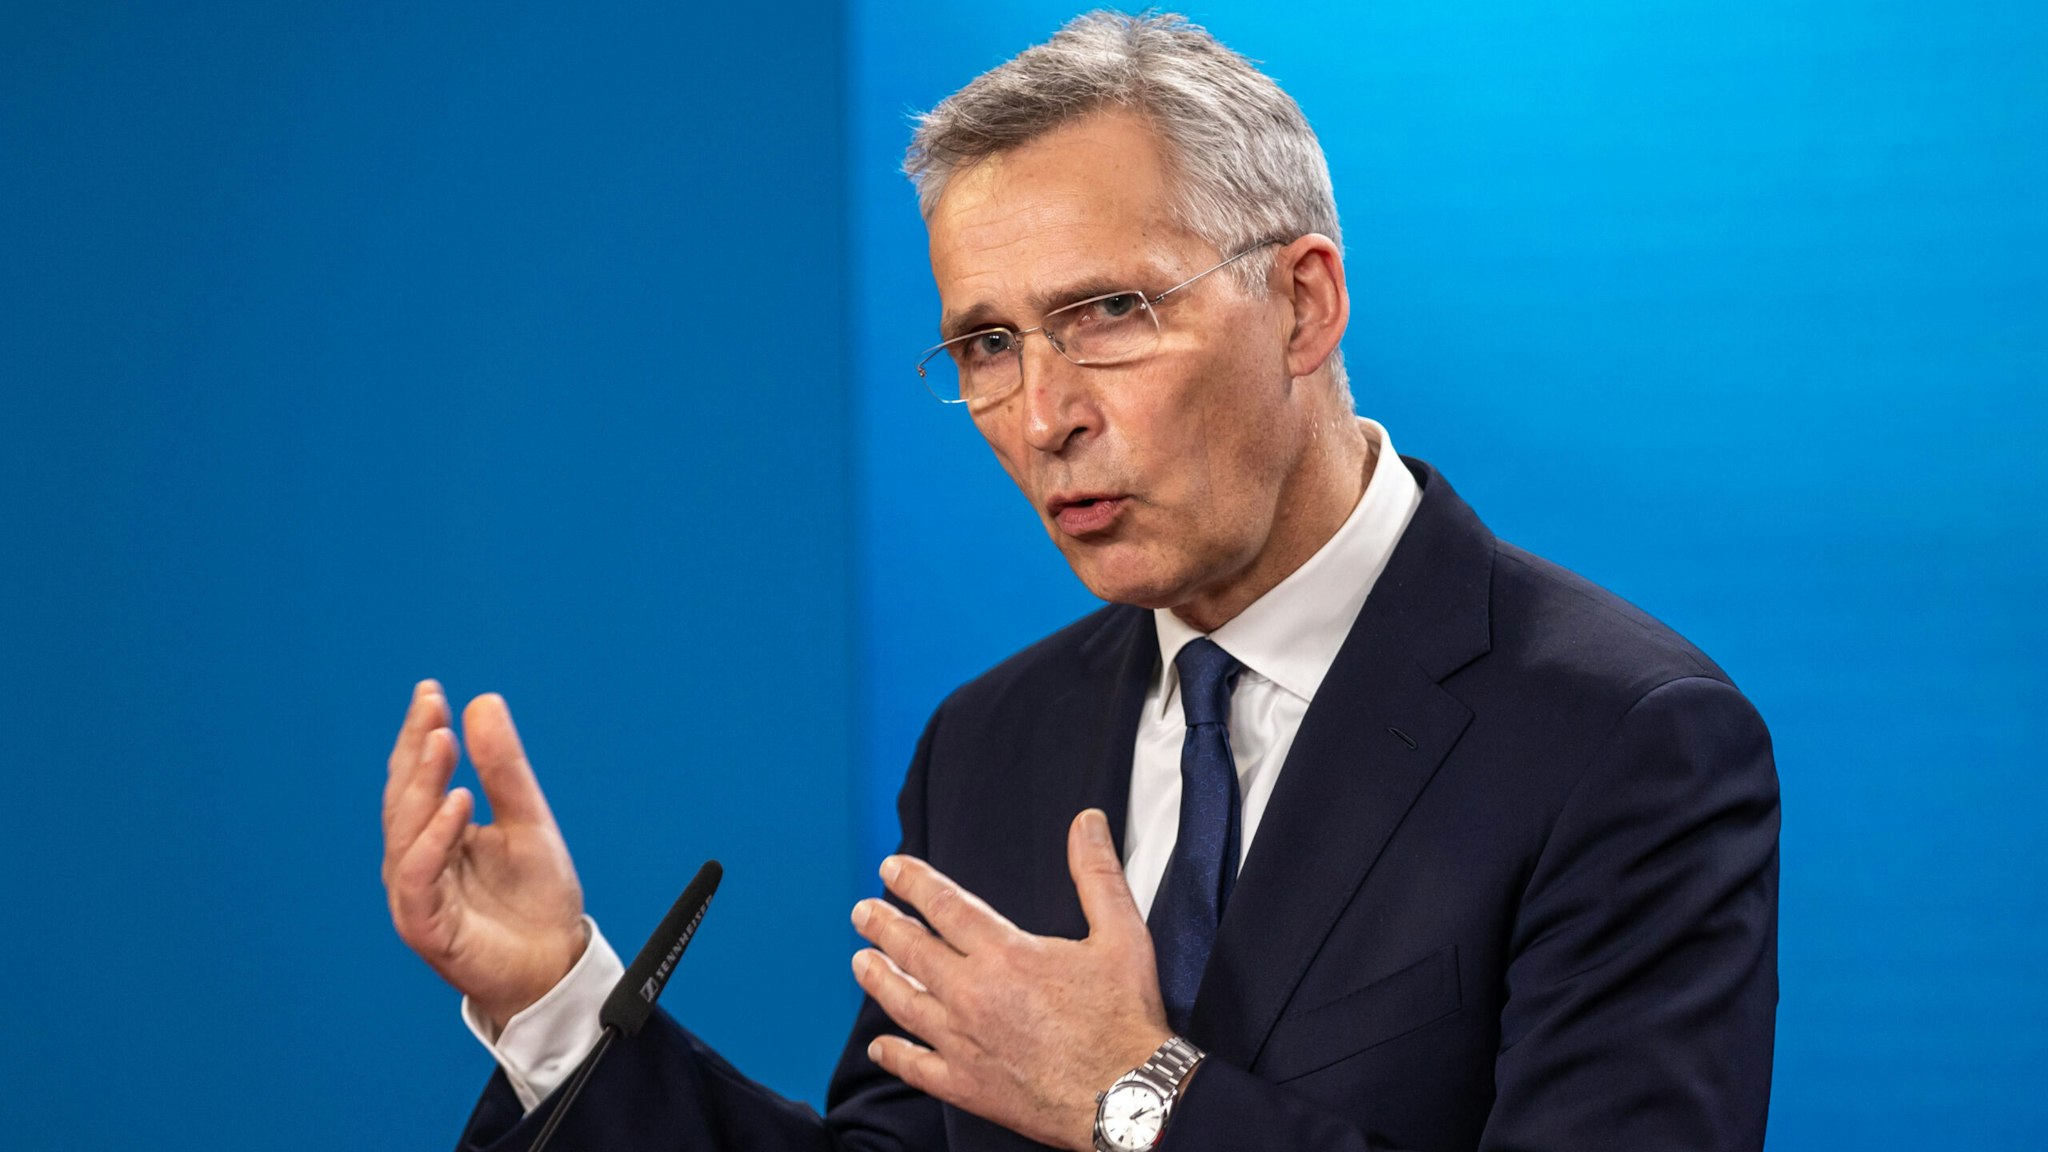 BERLIN, GERMANY - MARCH 17: NATO Secretary General Jens Stoltenberg speaks during a press meeting ahead of a joint meeting with Foreign Minister Annalena Baerbock at the Federal Foreign Office on March 17, 2022 in Berlin, Germany.